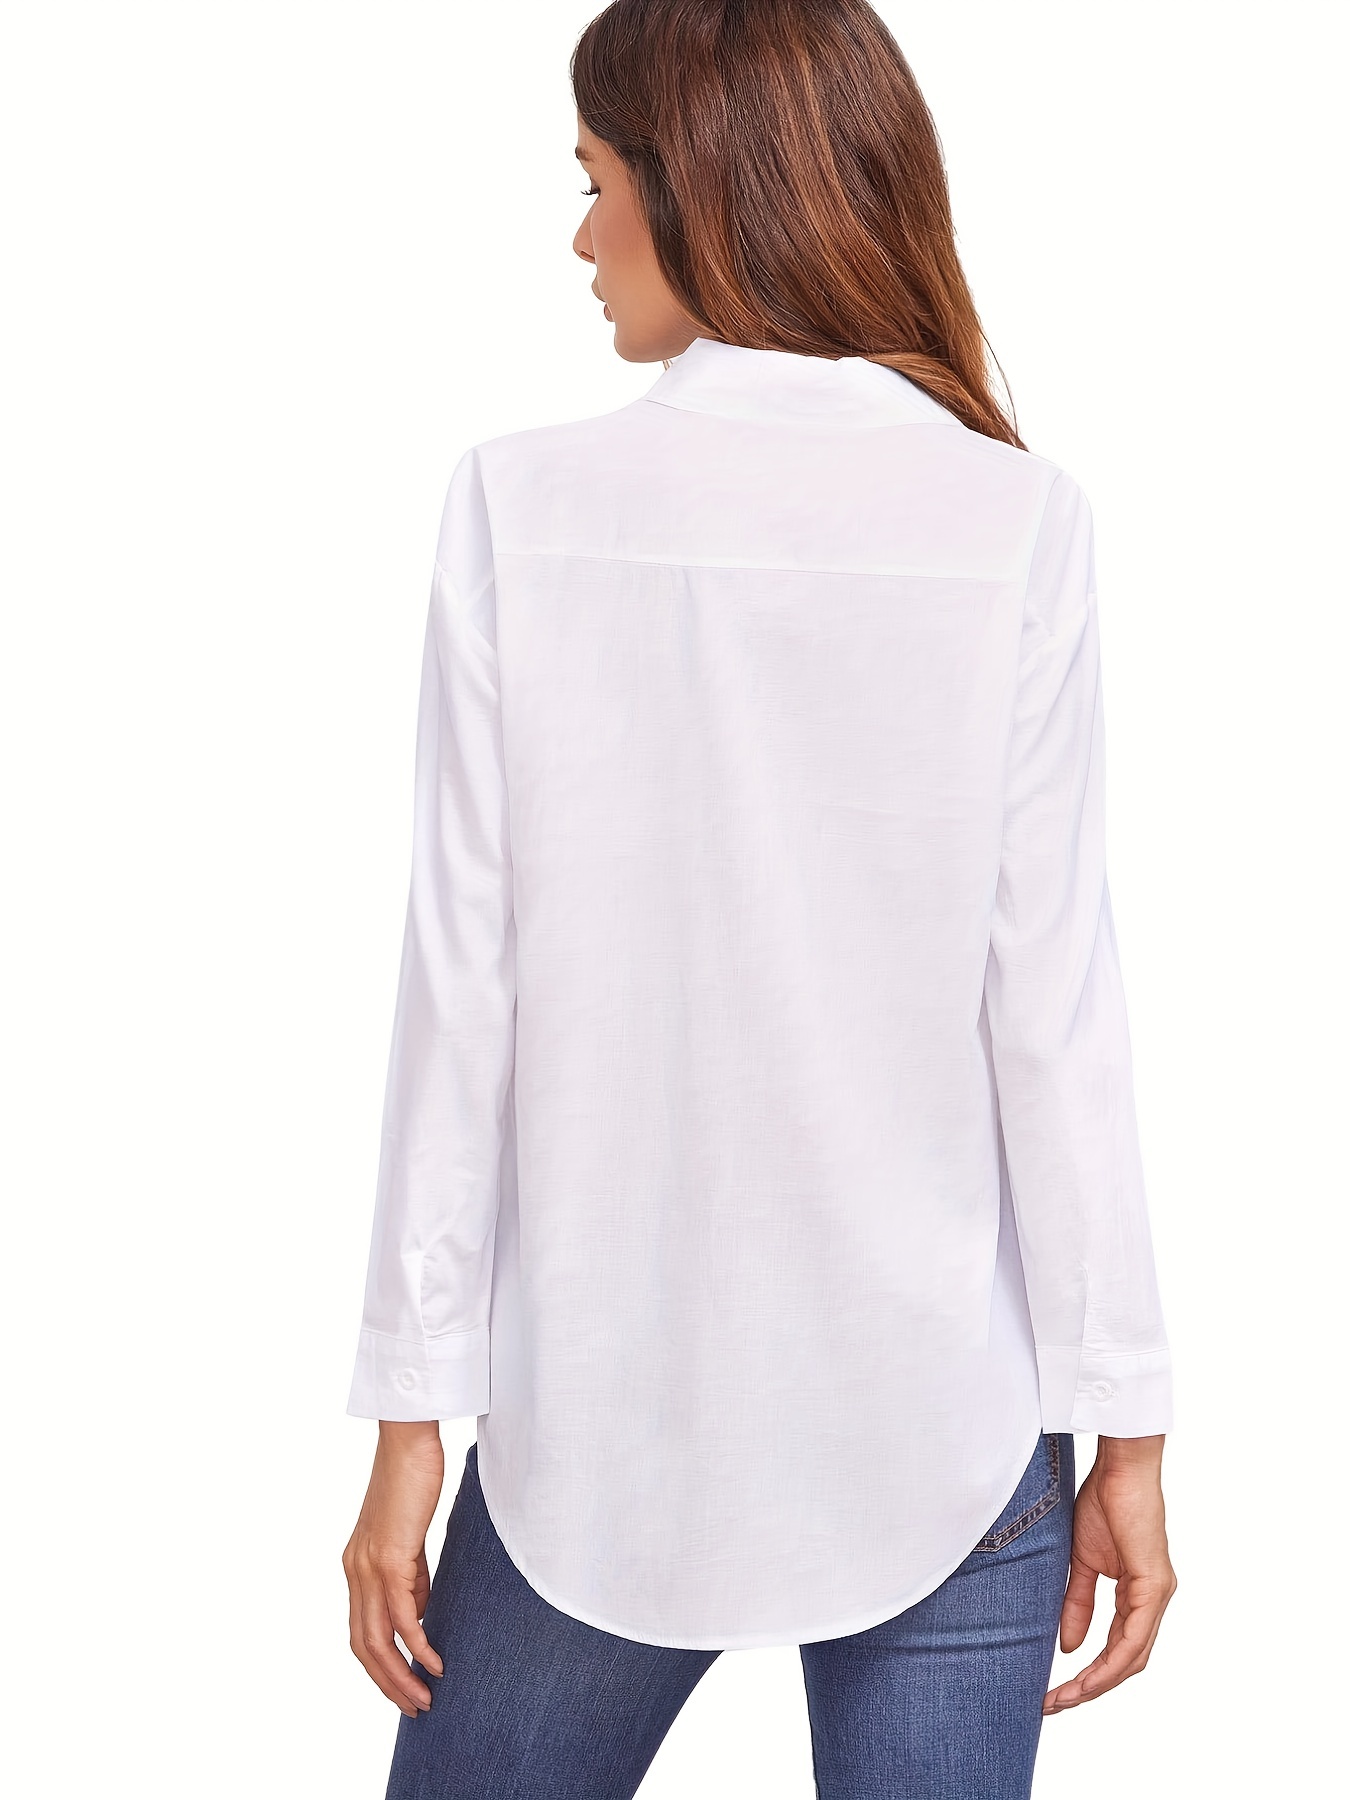 solid simple work office shirt elegant button front long sleeve shirt womens clothing